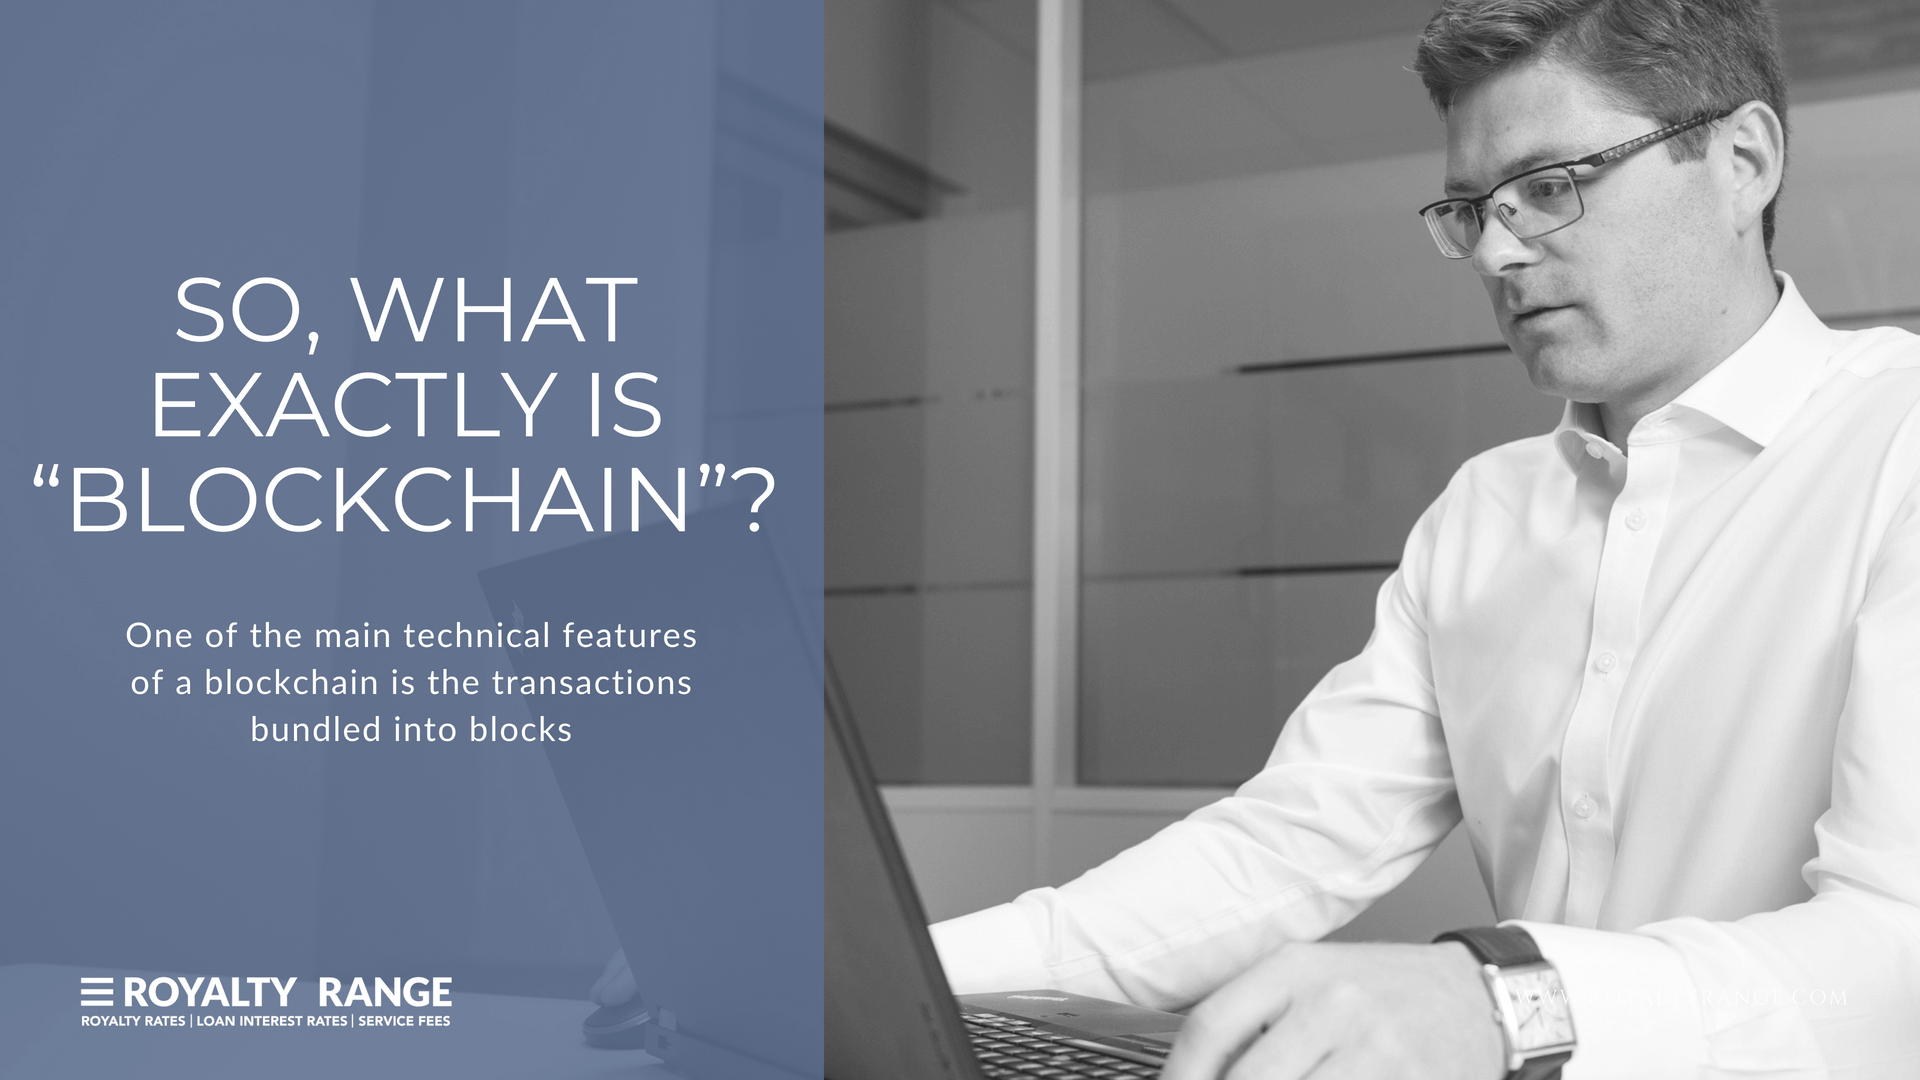 So, what exactly is “Blockchain”?